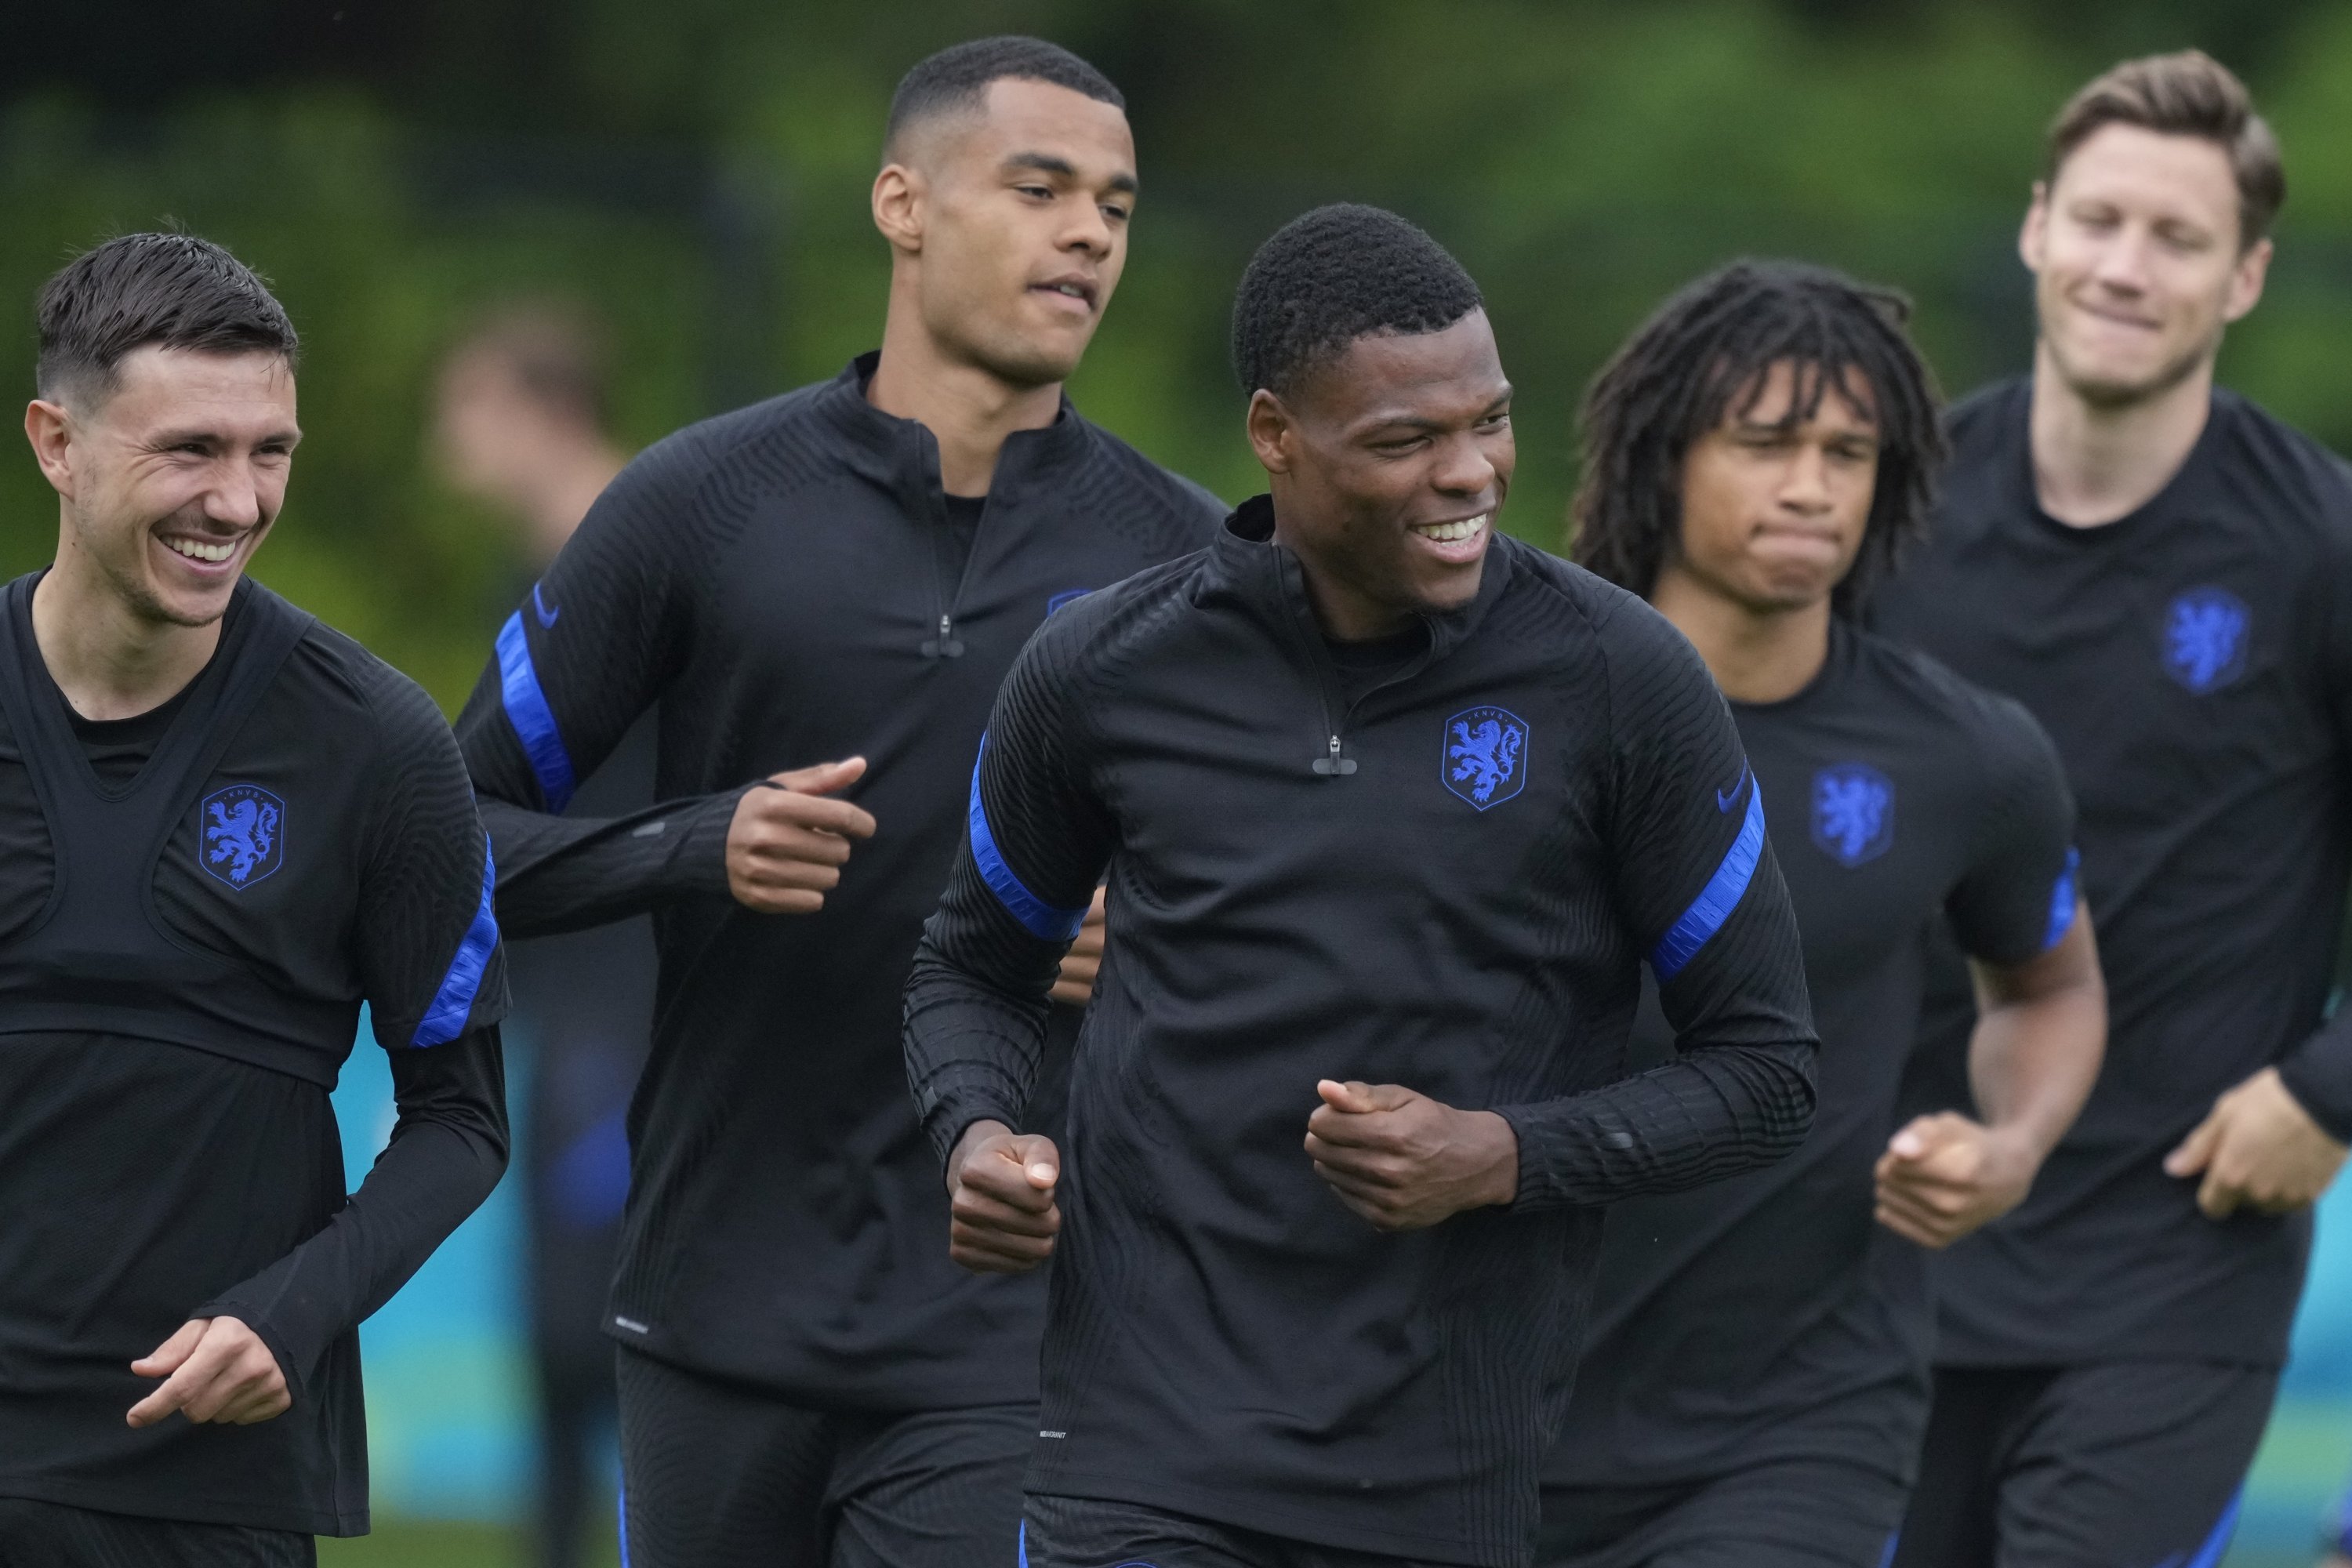 (From L to R) Dutch players Steven Berghuis, Cody Gakpo, Denzel Dumfries, Nathan Ake and Wout Weghorst attend a training session in Zeist, Netherlands, June 20, 2021 (AP Photo)